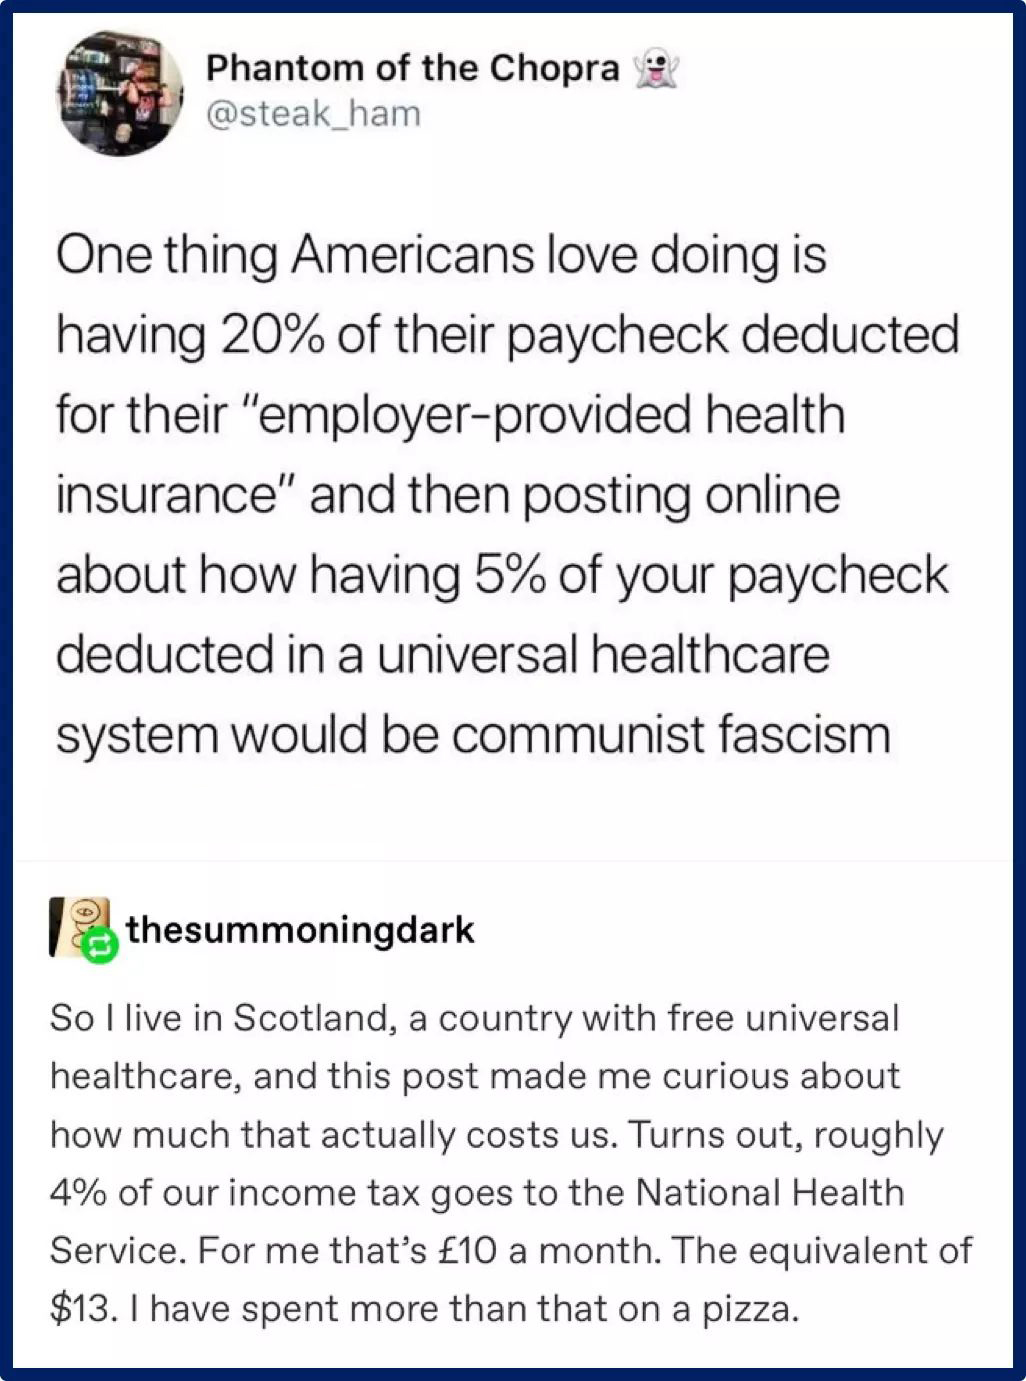 document - A Phantom of the Chopra One thing Americans love doing is having 20% of their paycheck deducted for their "employerprovided health insurance" and then posting online about how having 5% of your paycheck deducted in a universal healthcare system